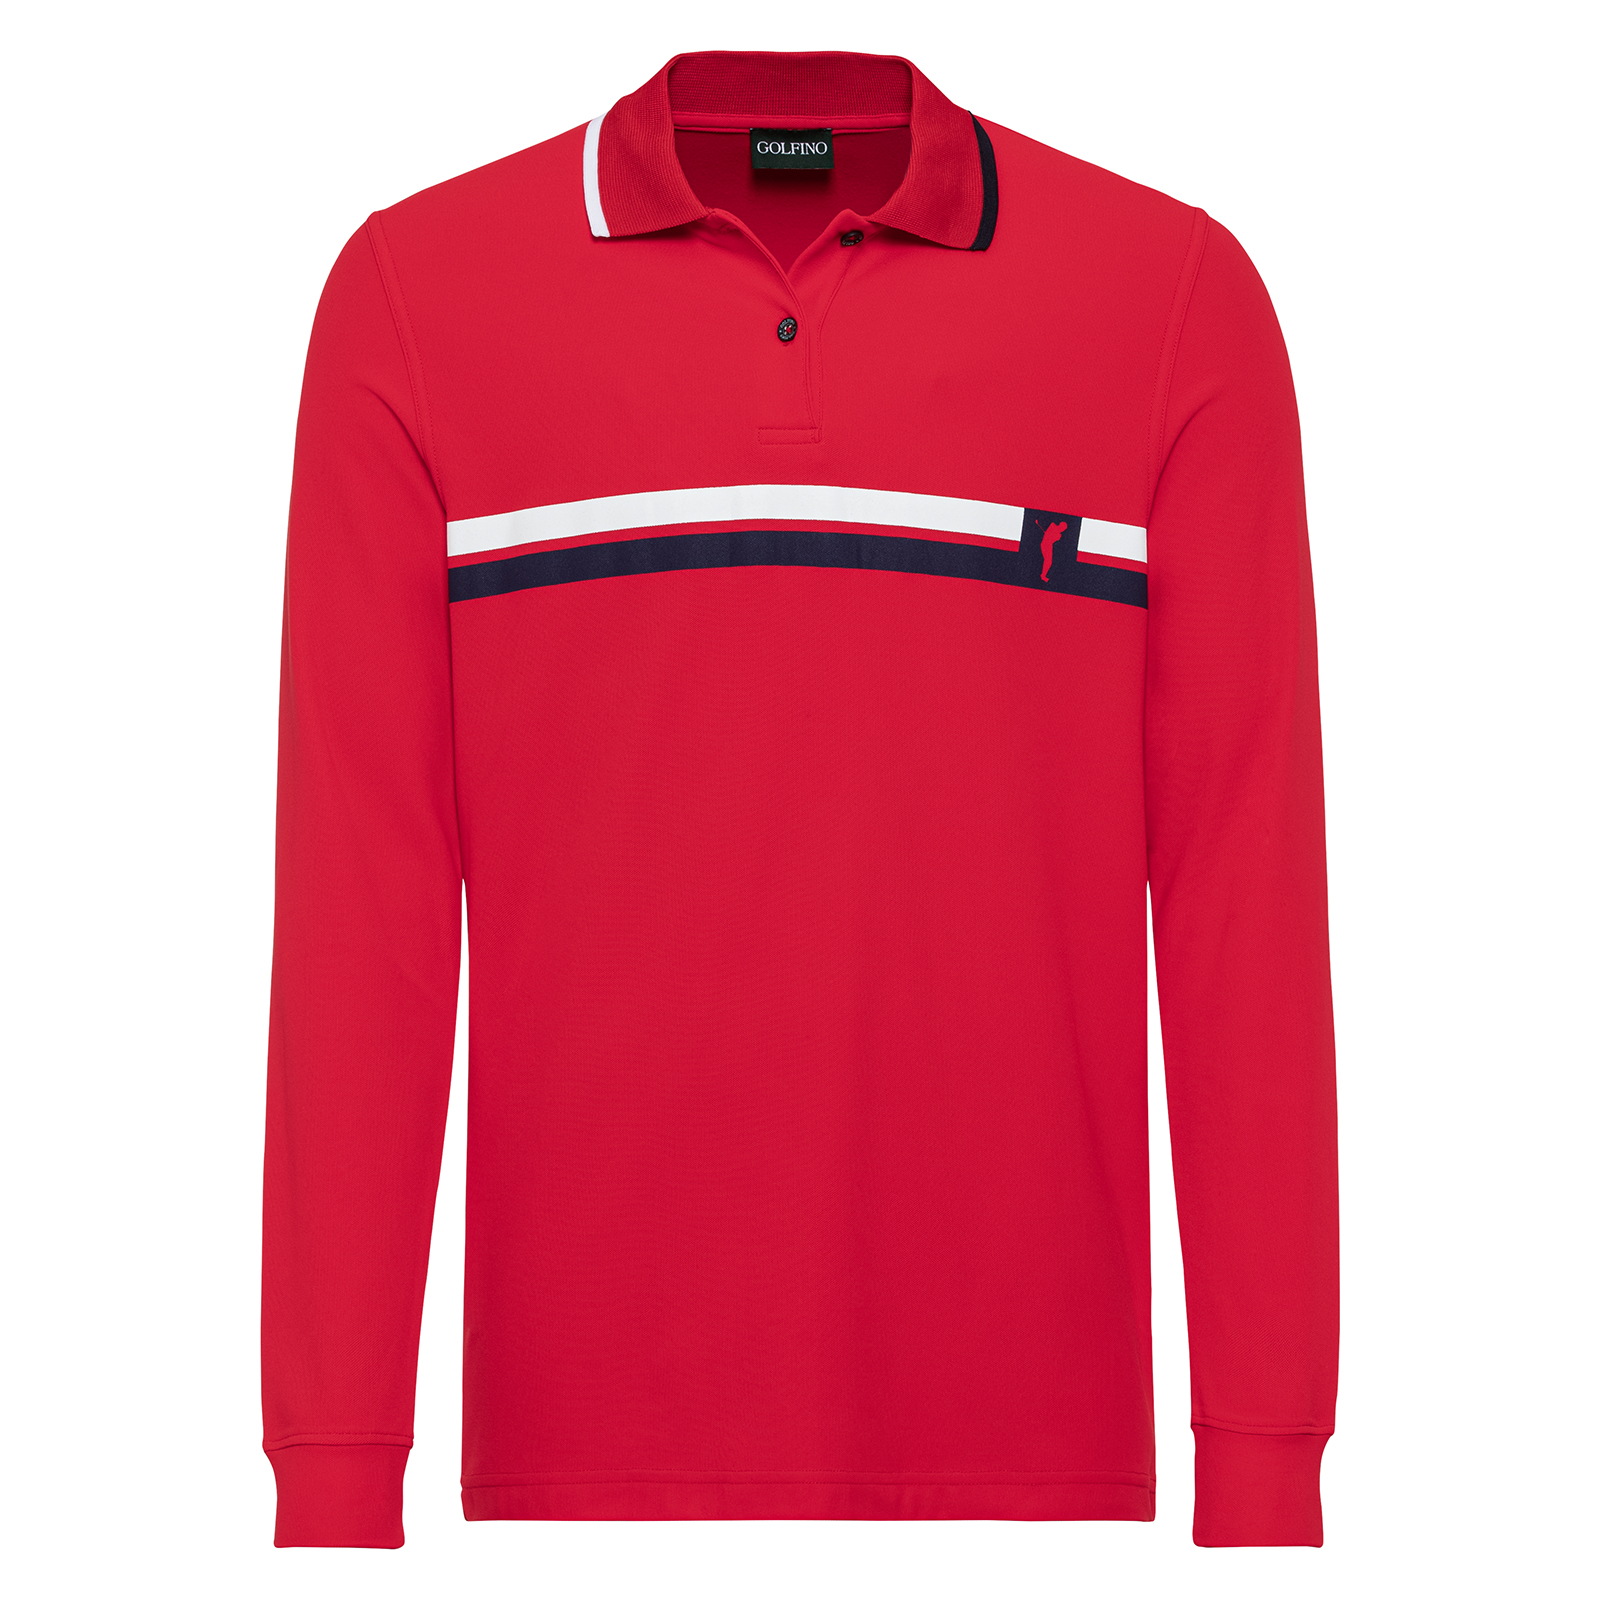 Men's quick dry long-sleeved polo shirt 